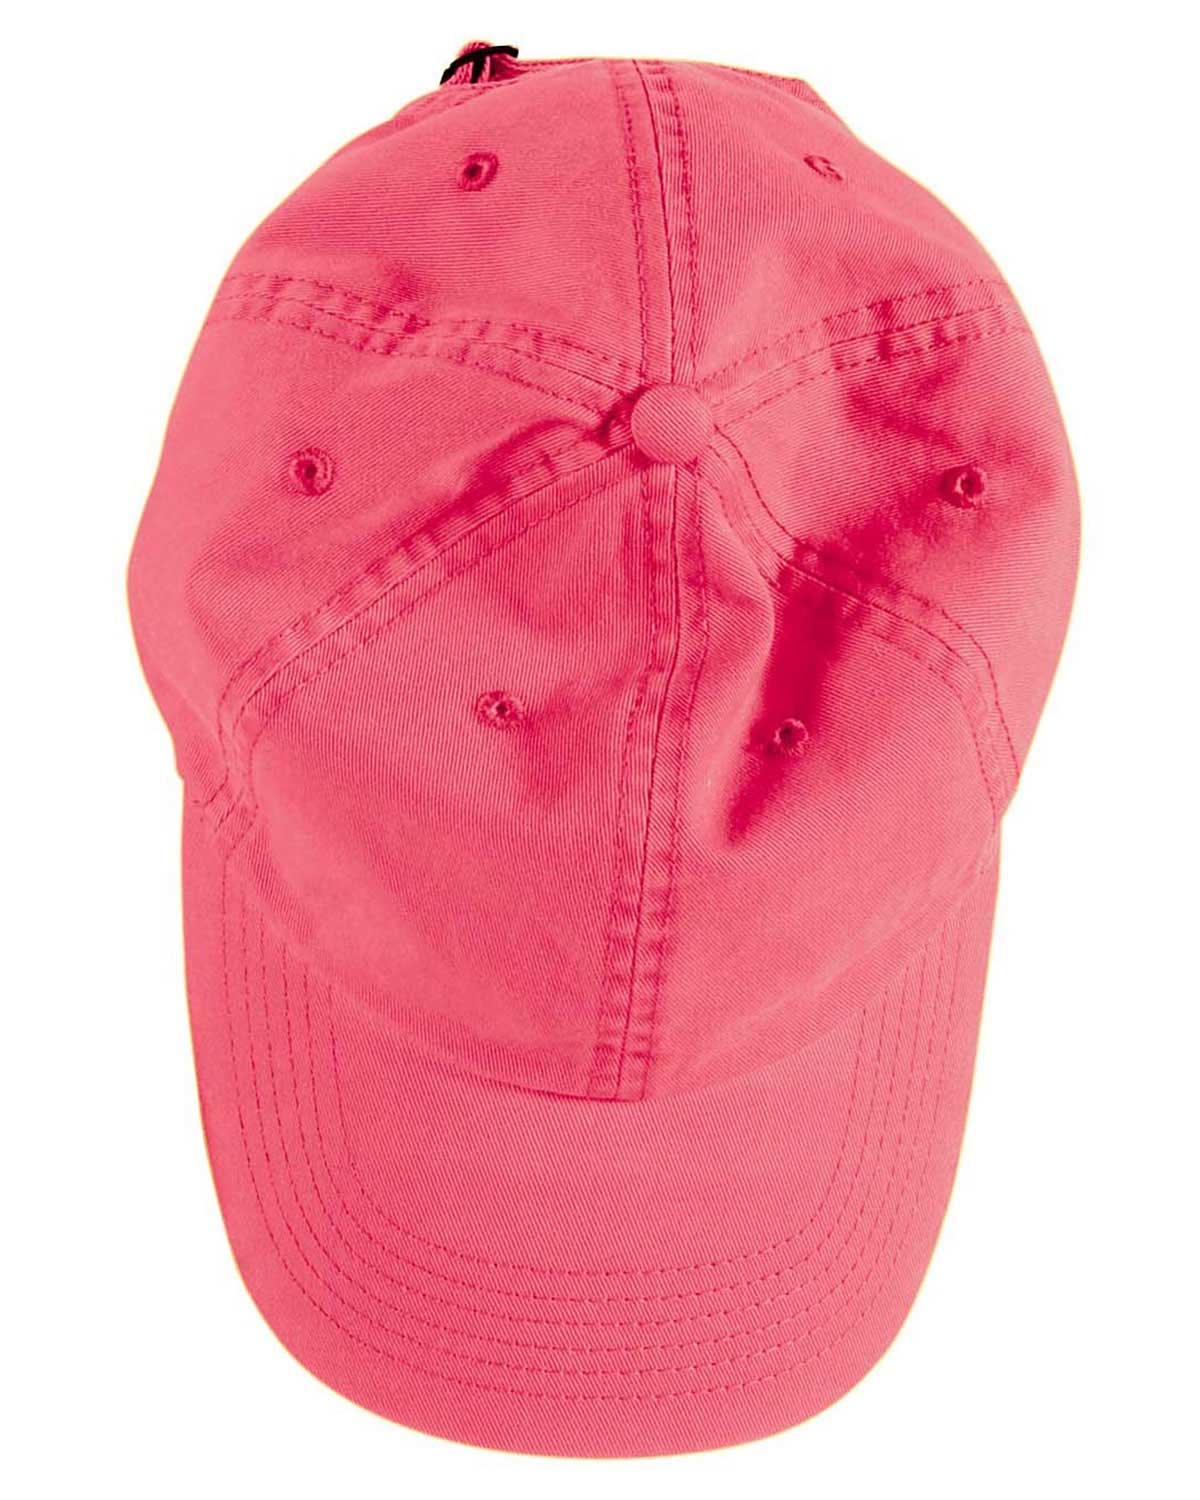 Authentic Pigment 1912 Unisex Direct-Dyed Twill Cap at Apparelstation